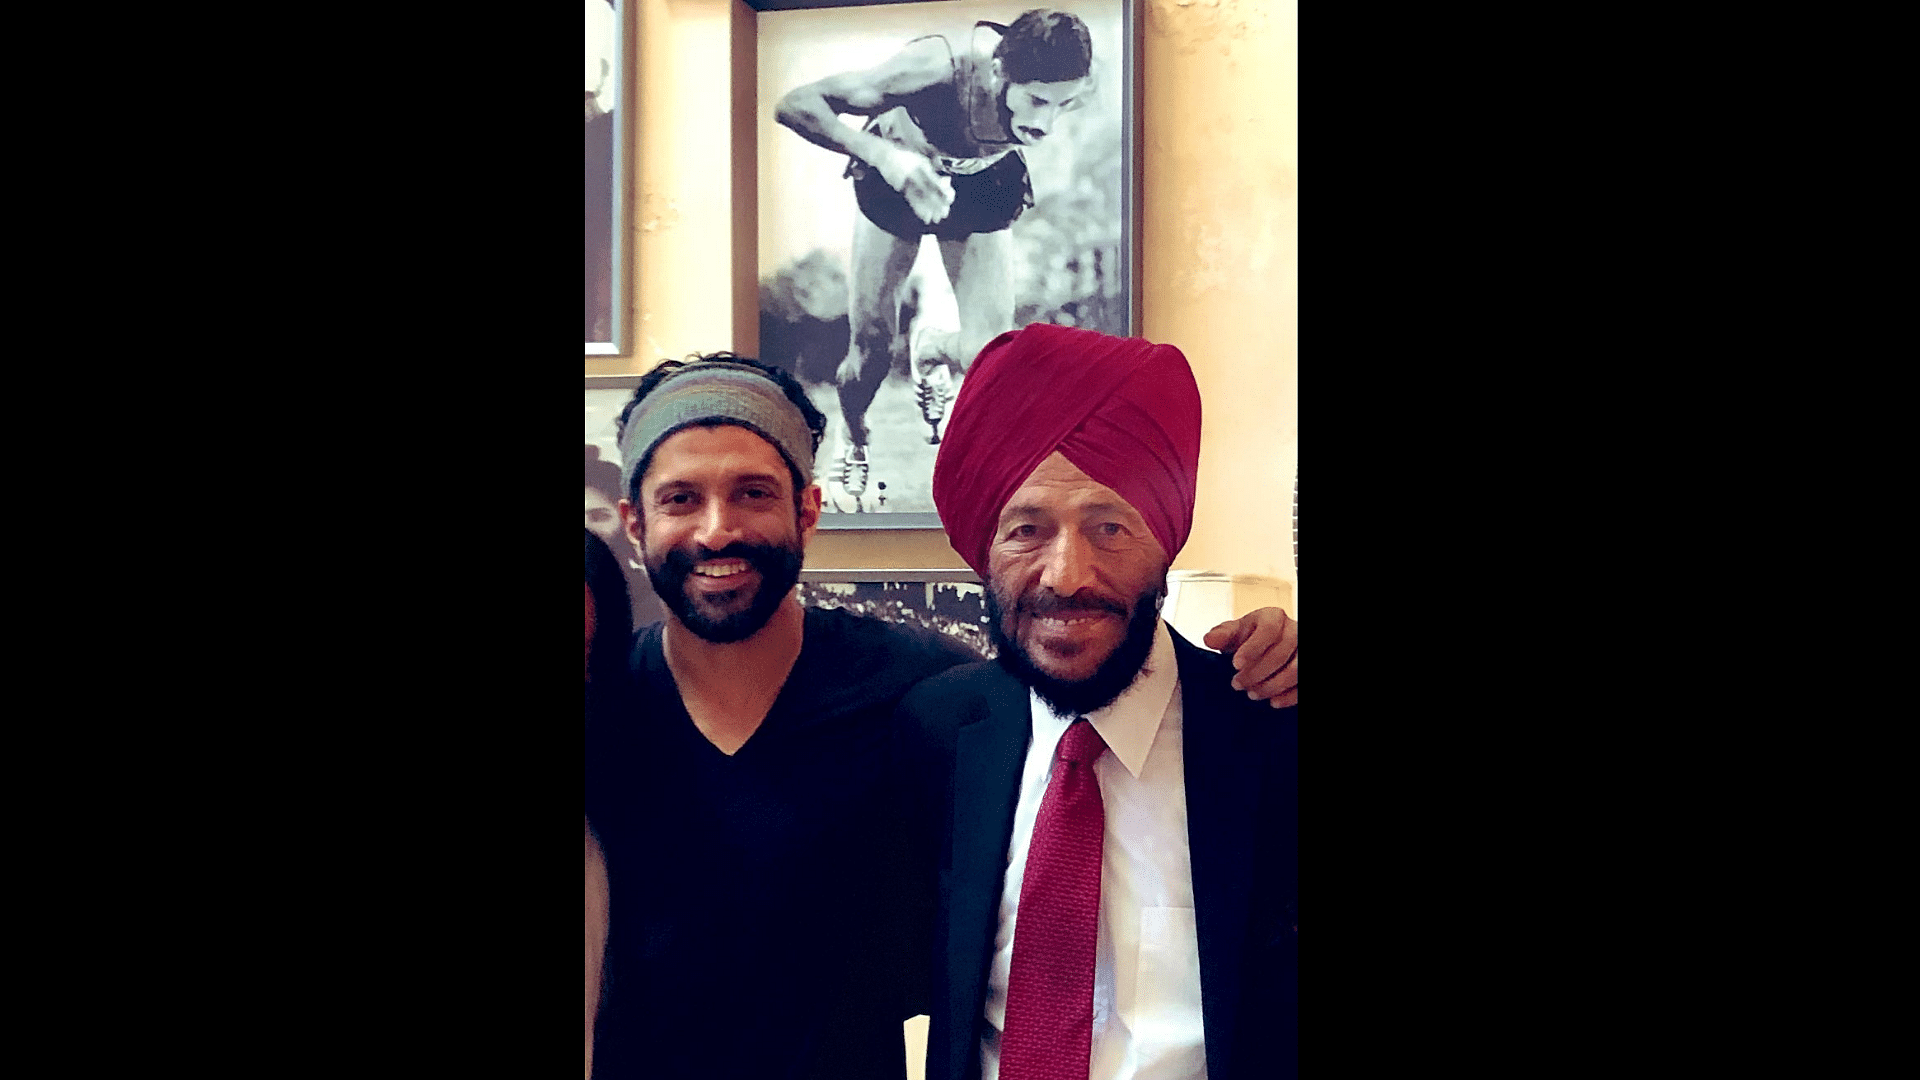 Bollywood actor Farhan Akhtar on Saturday, 19 June, paid tribute to legendary sprinter <a href="https://www.thequint.com/sports/covid-19-claims-india-pride-flying-sikh-milkha-singh-no-more">Milkha Singh</a>, saying, “I love you with all my heart.”